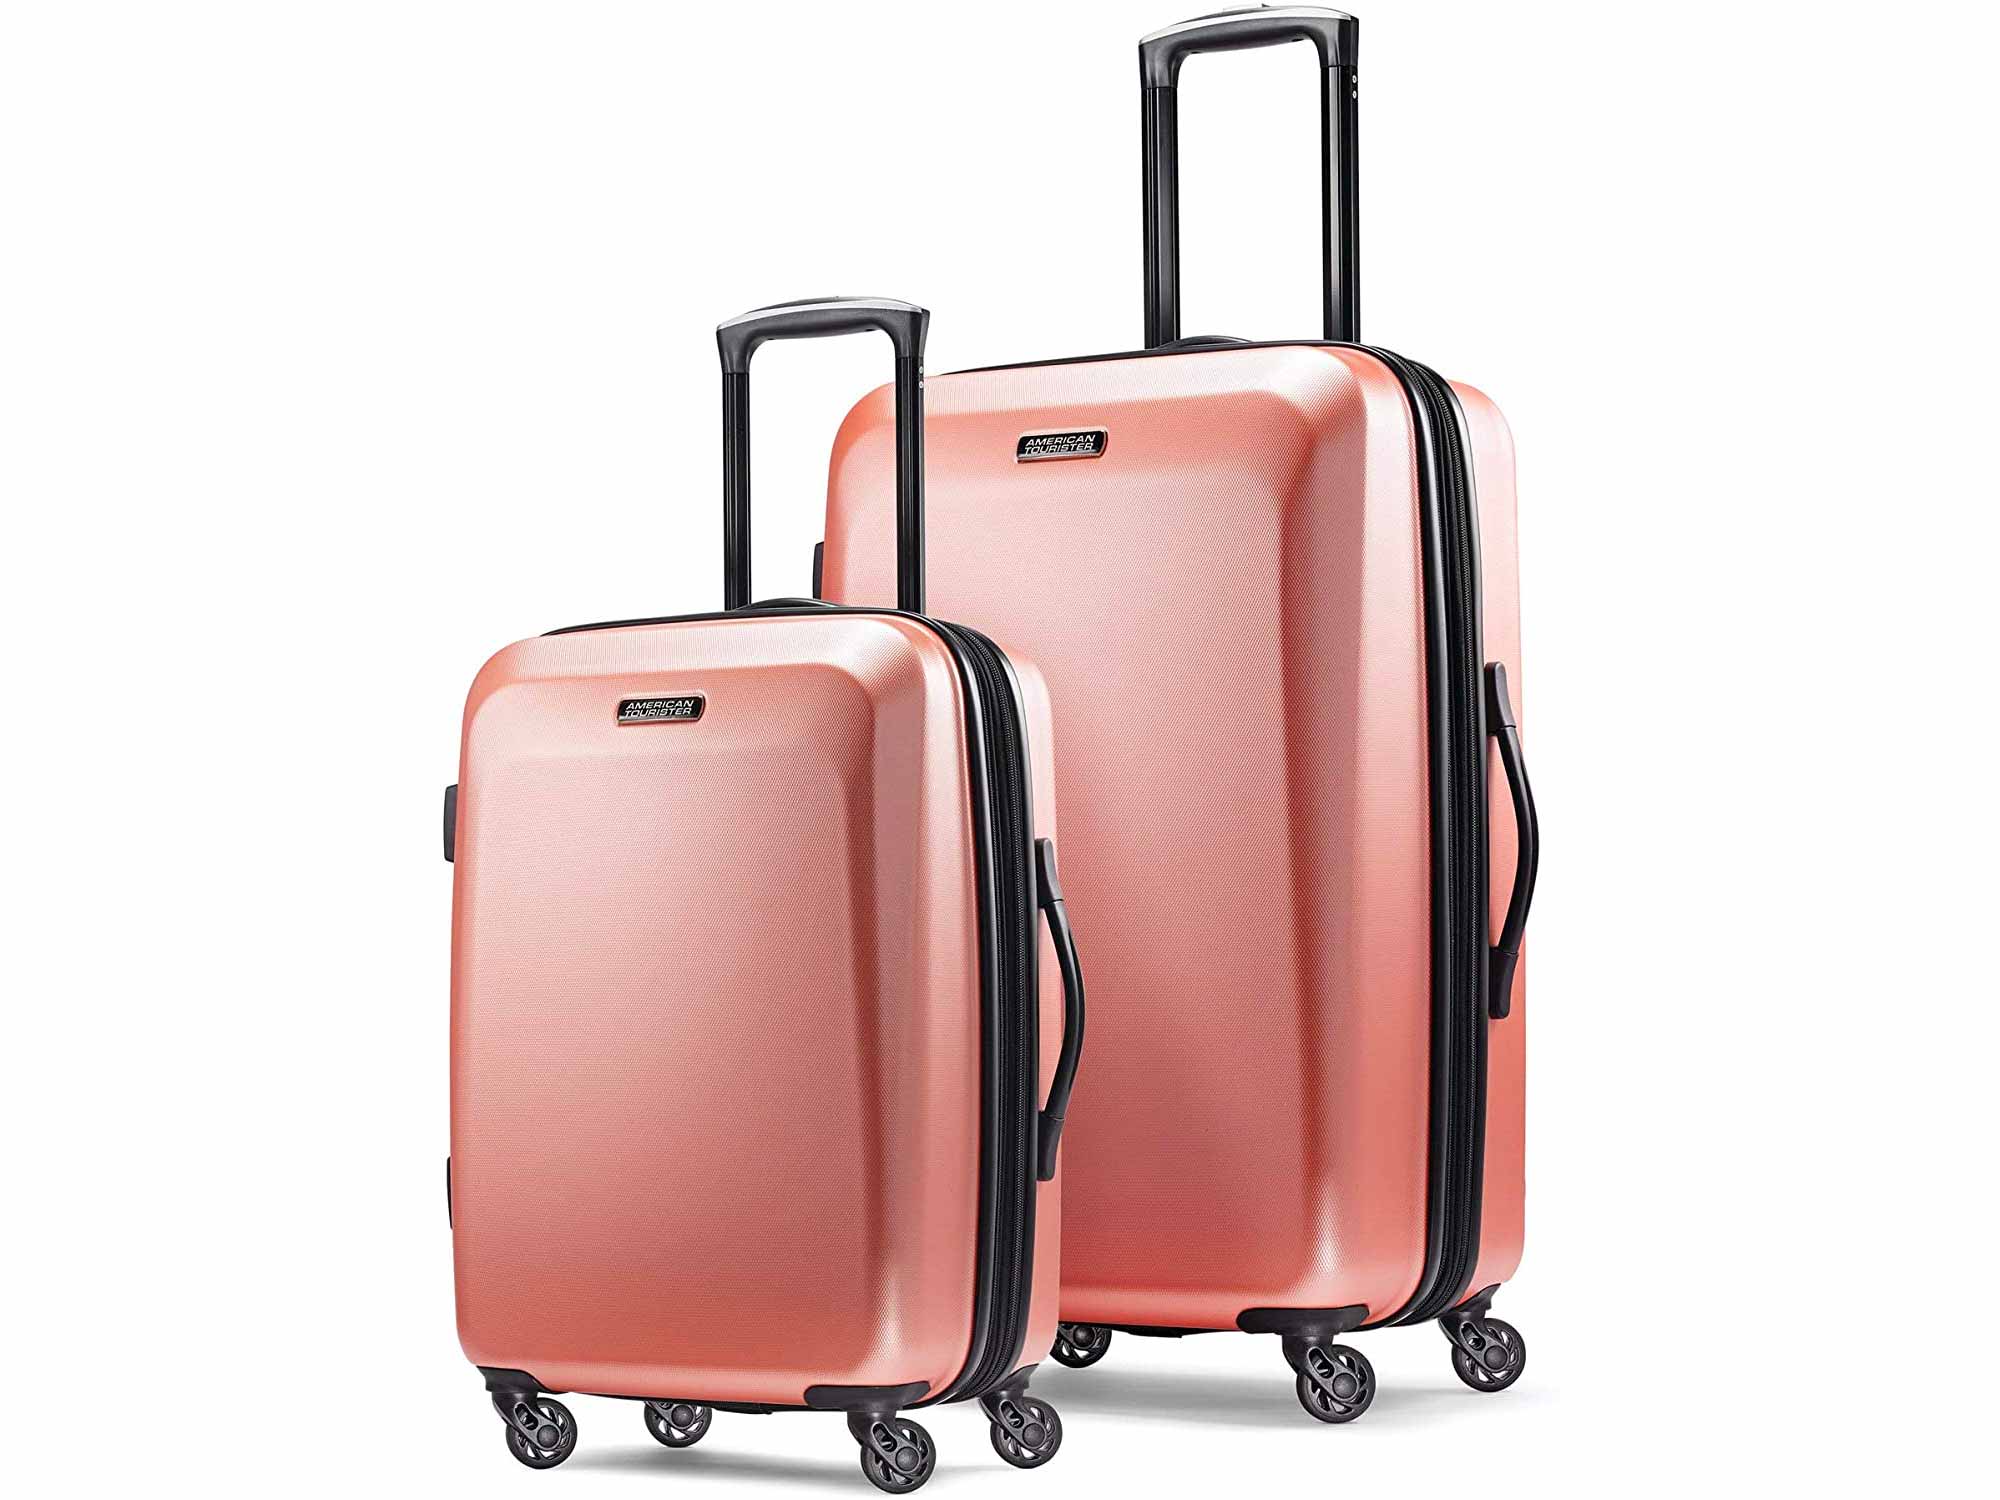 American Tourister Moonlight Hardside Expandable Luggage with Spinner Wheels, Rose Gold, 2-Piece Set (21/24)